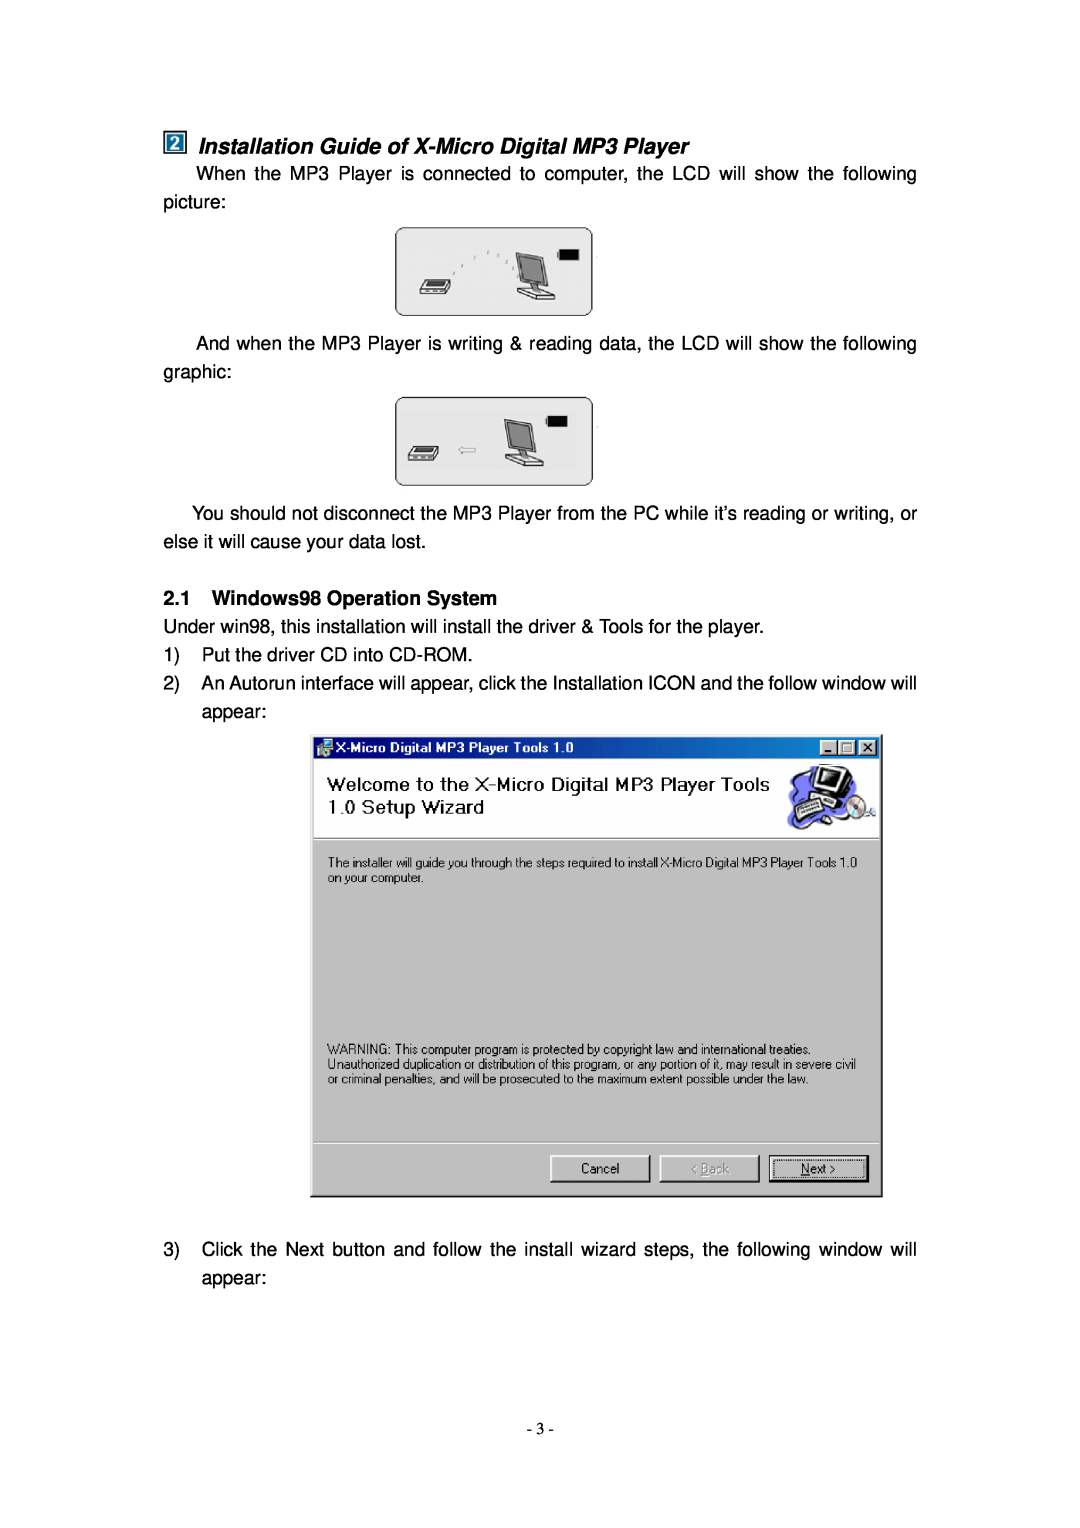 X-Micro Tech user manual Installation Guide of X-Micro Digital MP3 Player, Windows98 Operation System 